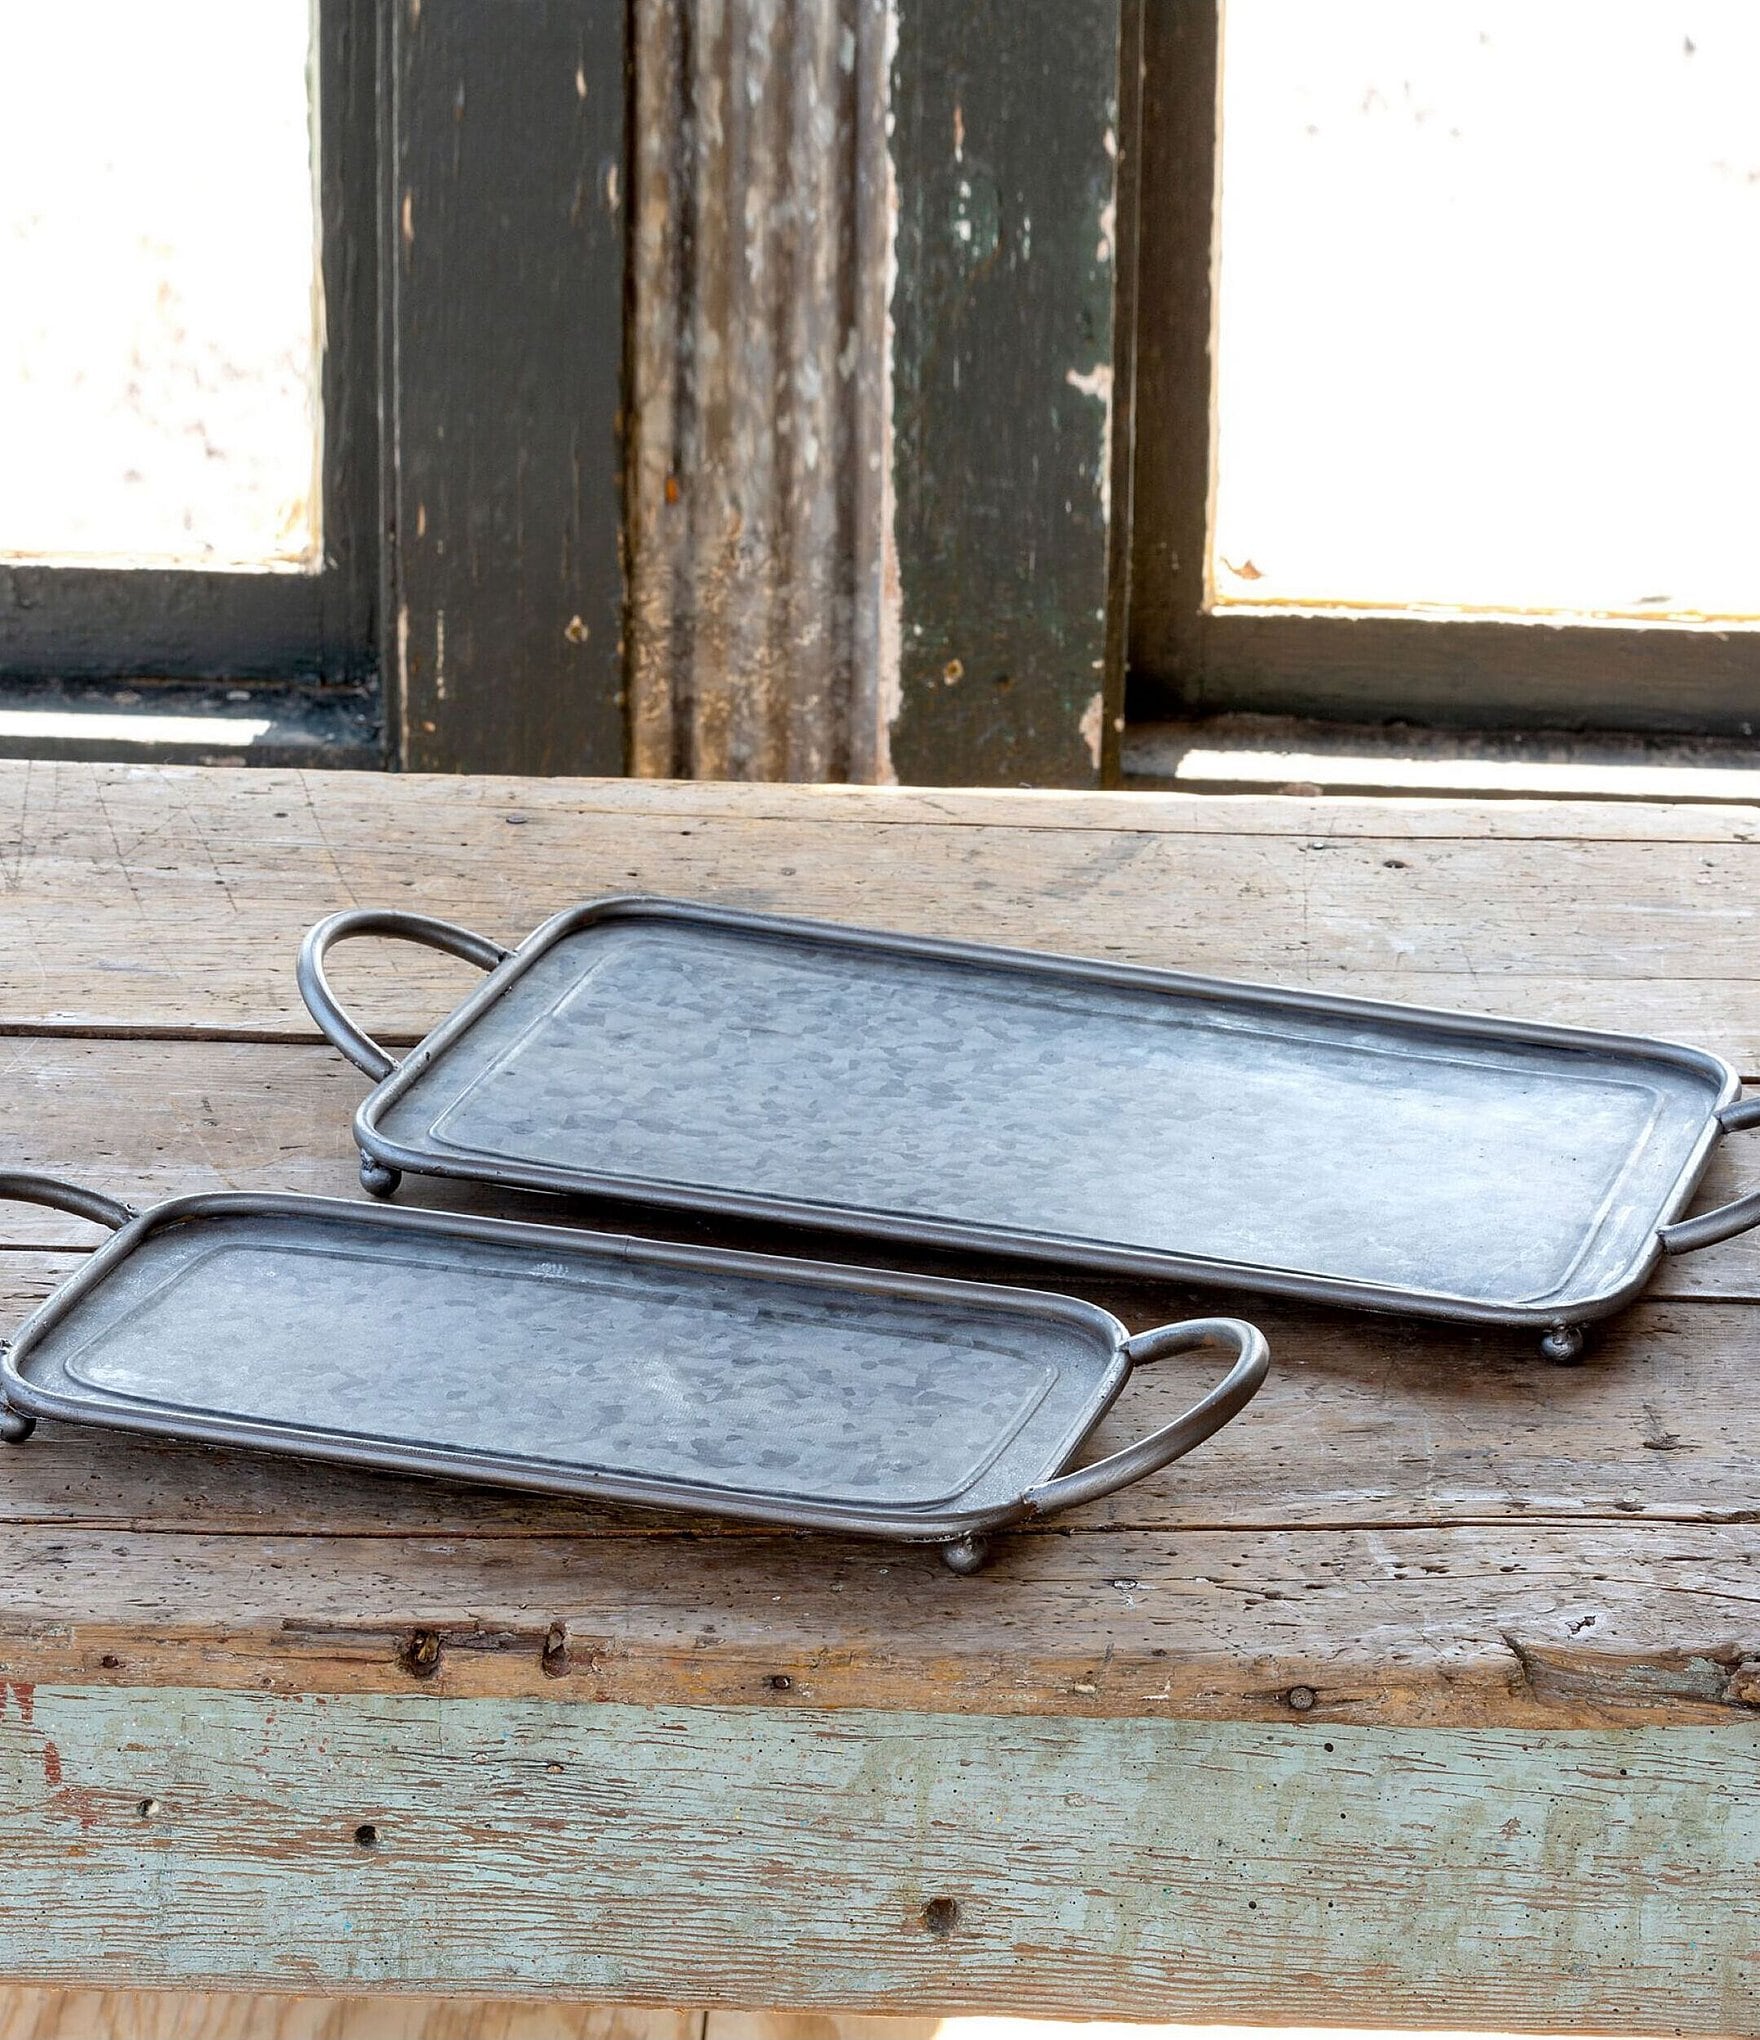 https://dimg.dillards.com/is/image/DillardsZoom/zoom/park-hill-cafe-collection-galvanized-metal-rectangle-serving-tray-set-of-2/20206321_zi.jpg